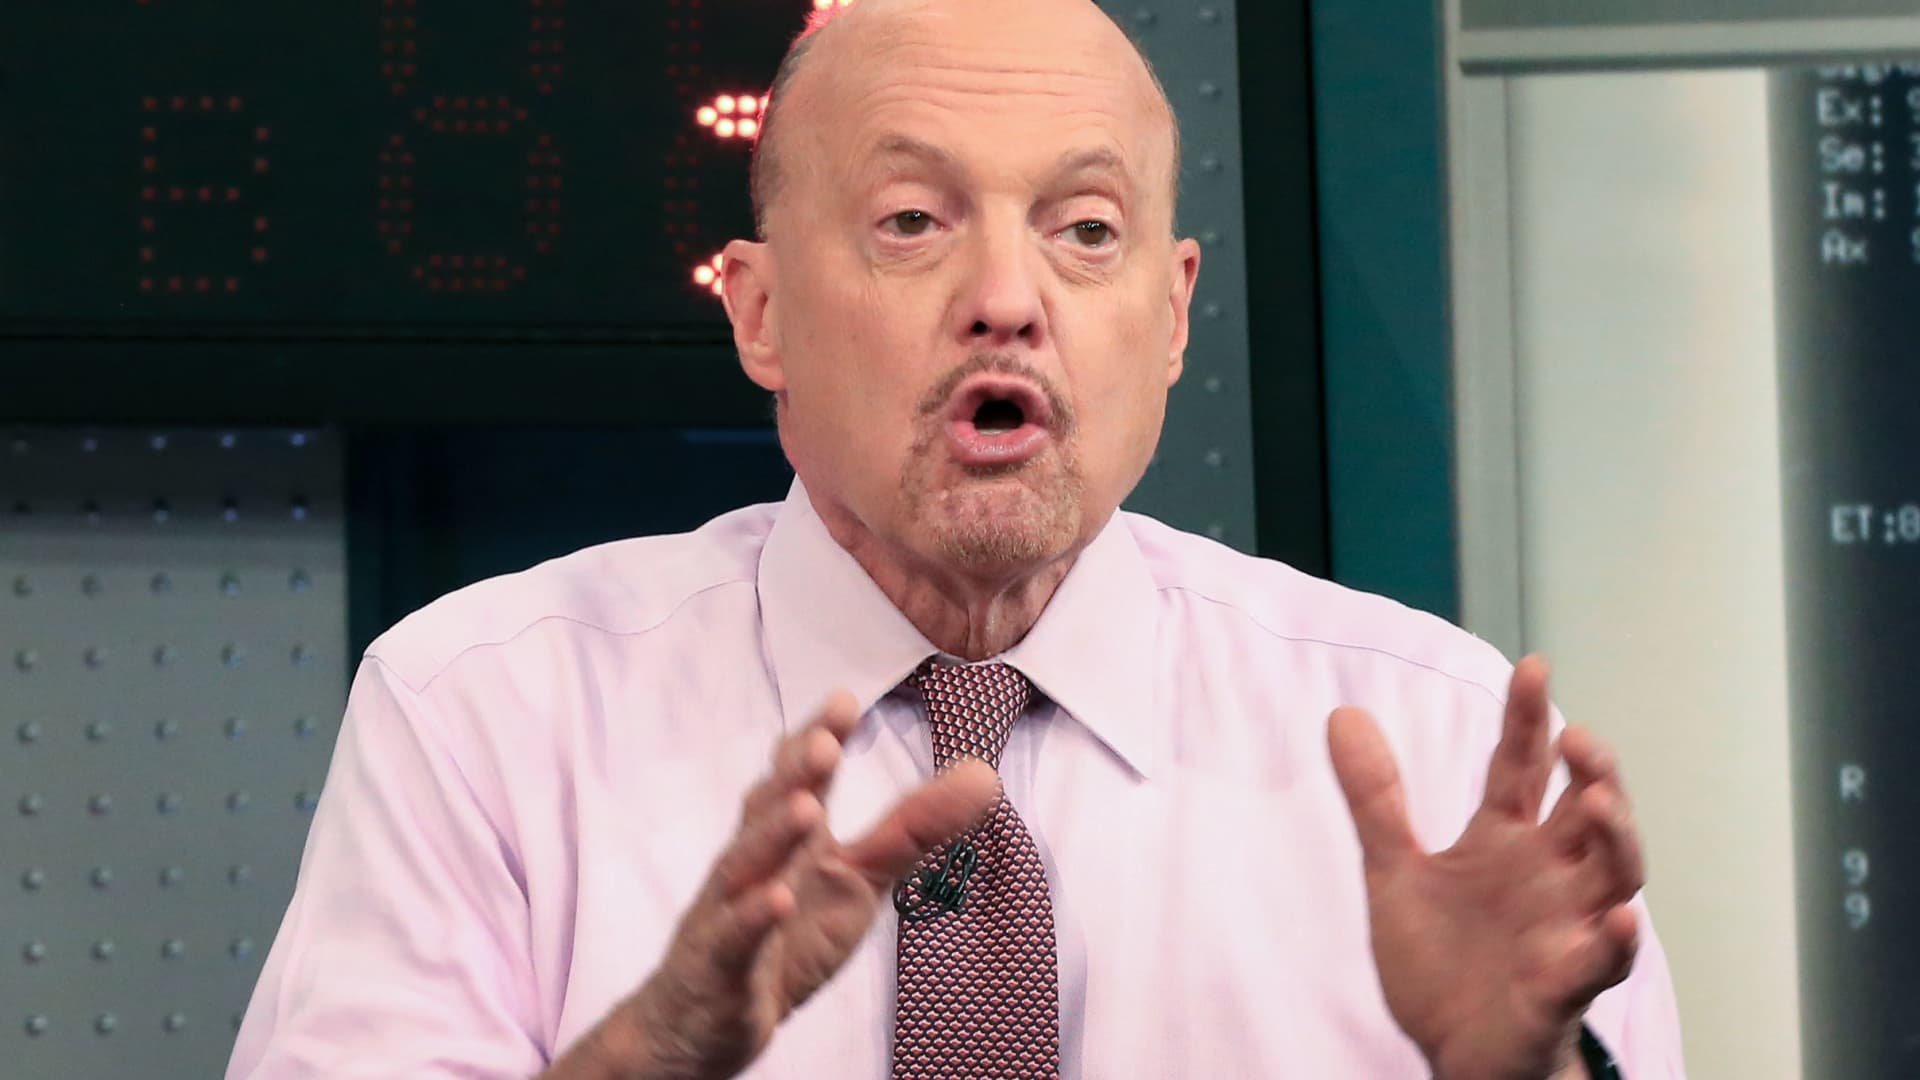 Don’t bet against short sellers in this market, Jim Cramer warns - CNBC